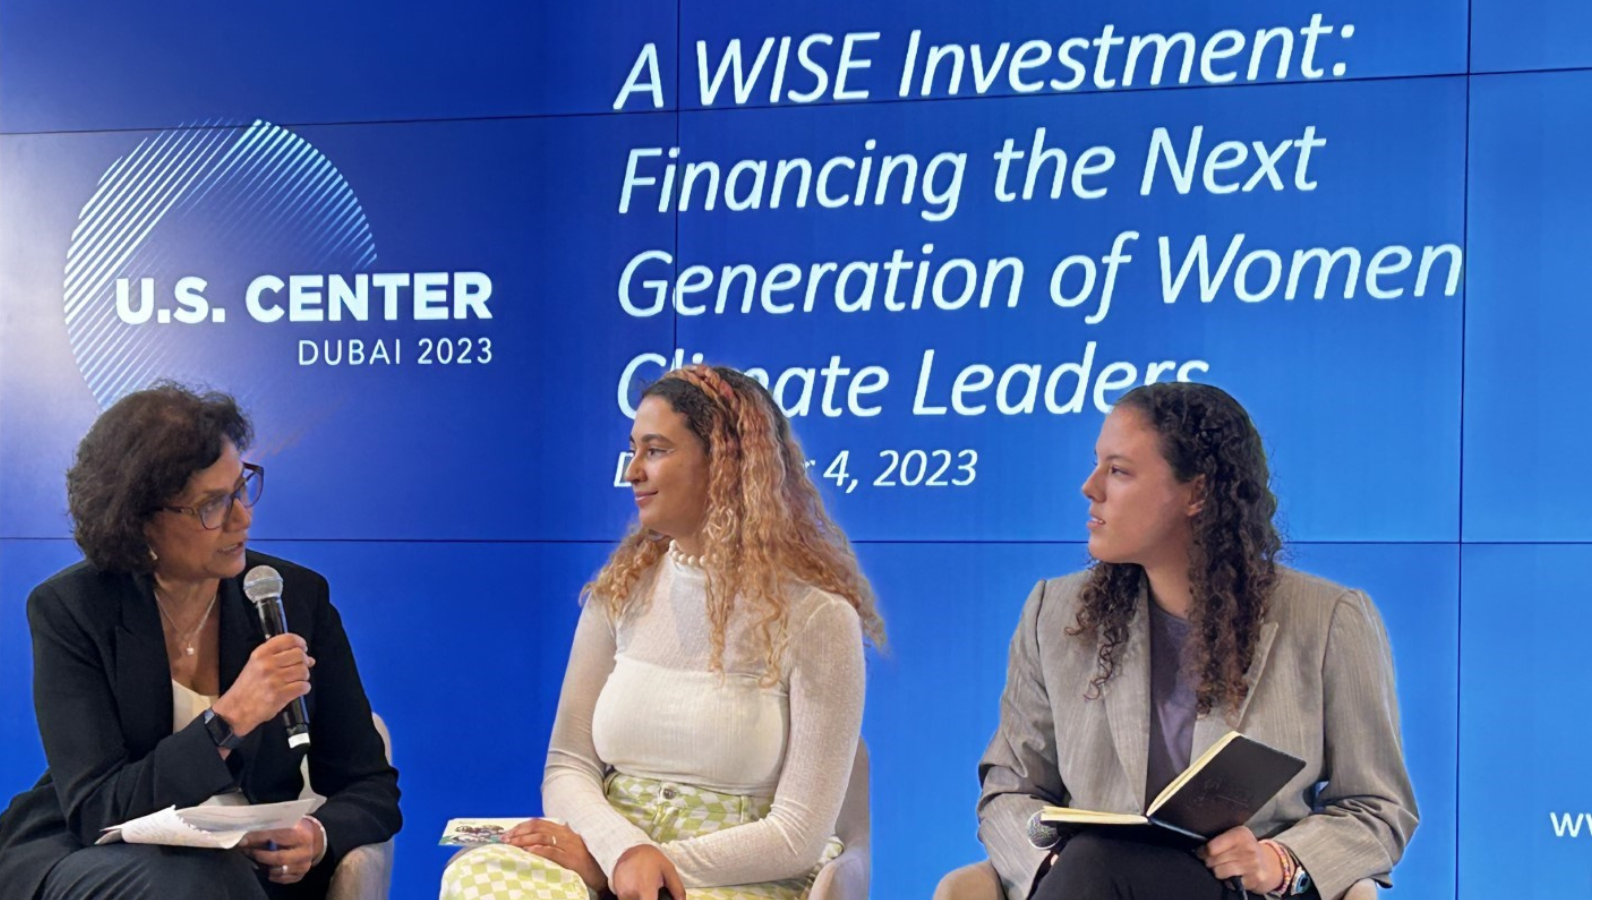 Dr. Geeta Rao Gupta, U.S. Ambassador-at-Large for Global Women’s Issues, moderates a discussion with Raysa França (Youth4Climate) and Hailey Campbell (Care About Climate) at the U.S. Center.